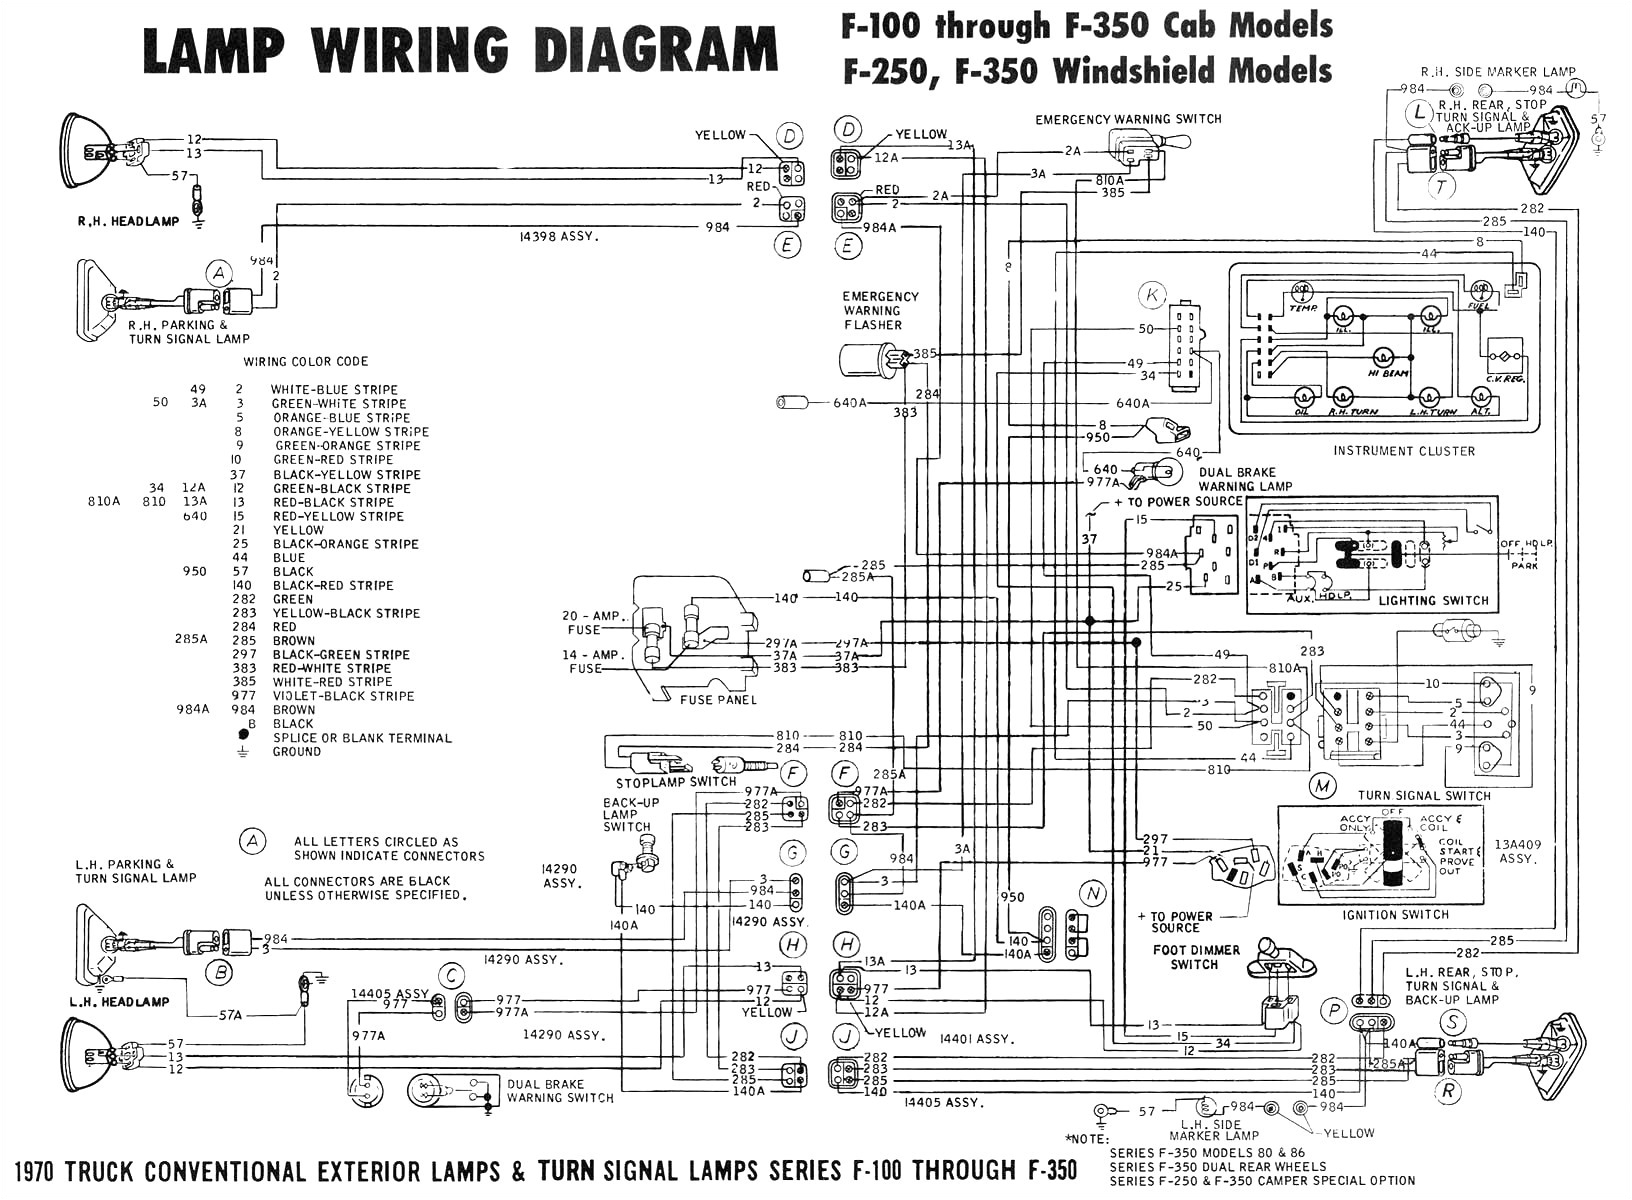 wiring diagram for 2001 ford f250 wiring diagrams bib 01 mustang convertible wiring diagram free picture